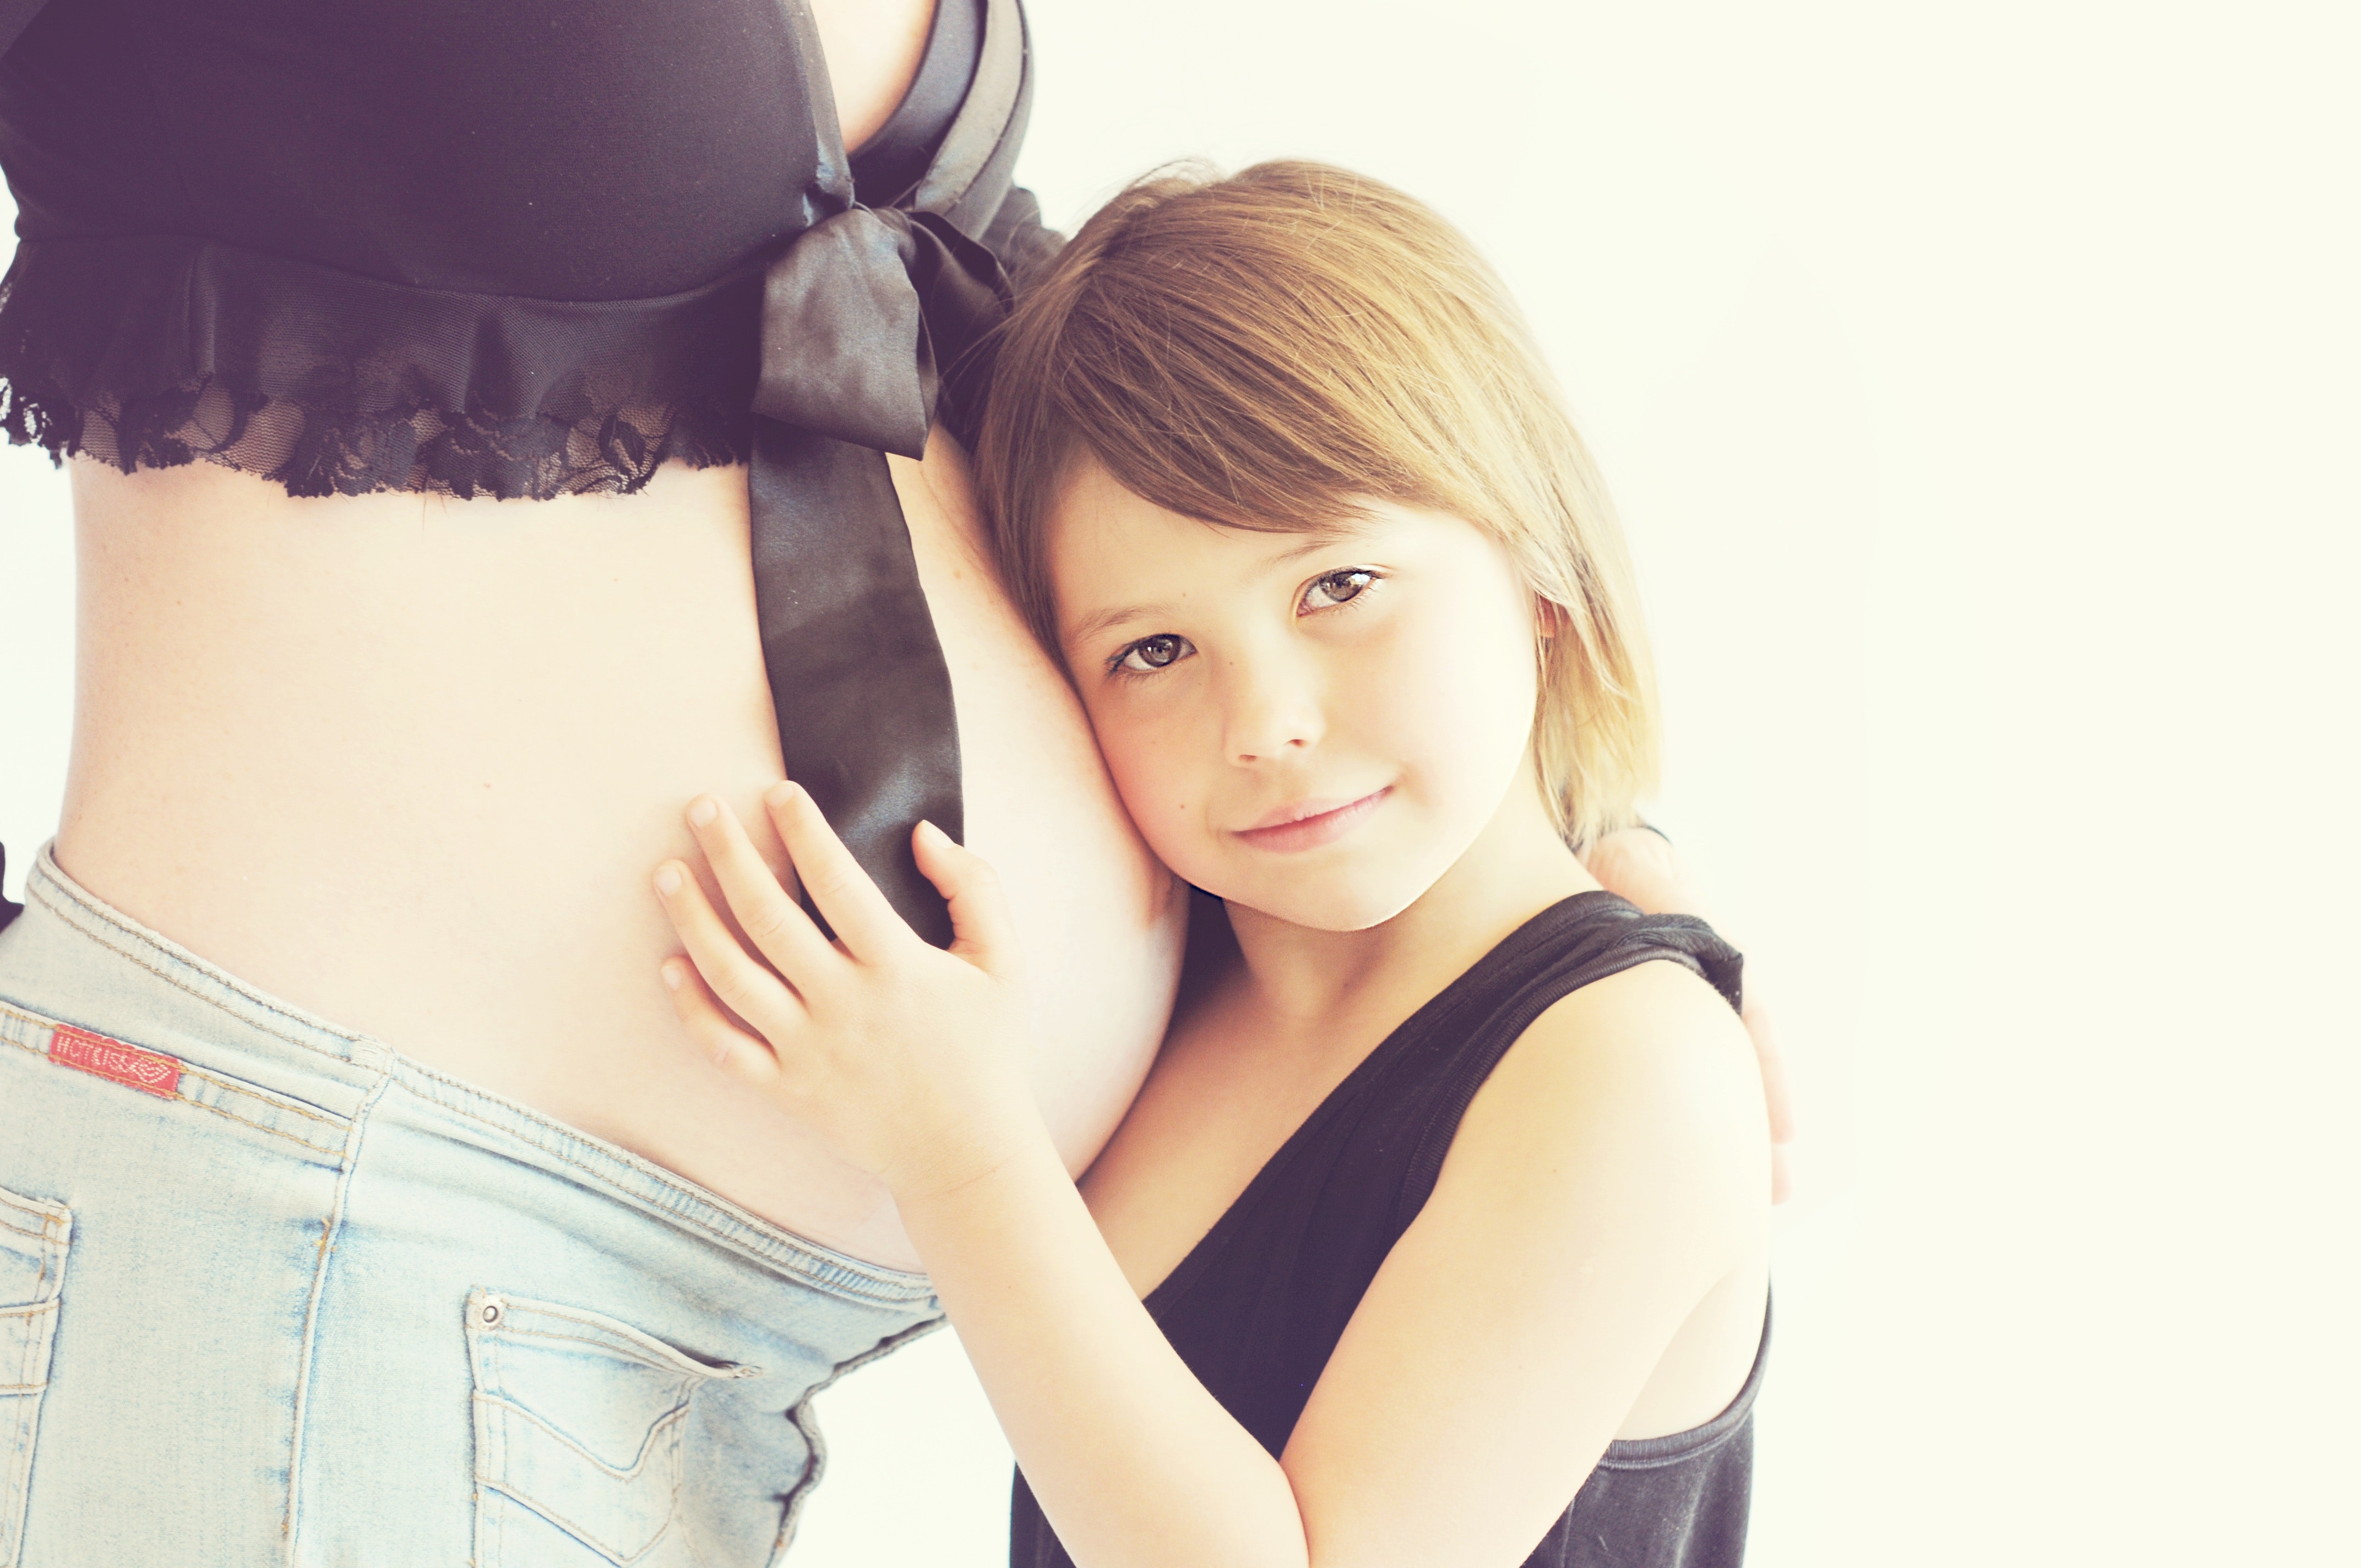 Close Up Photo Of Girl Standing Beside Pregnant Woman · Free